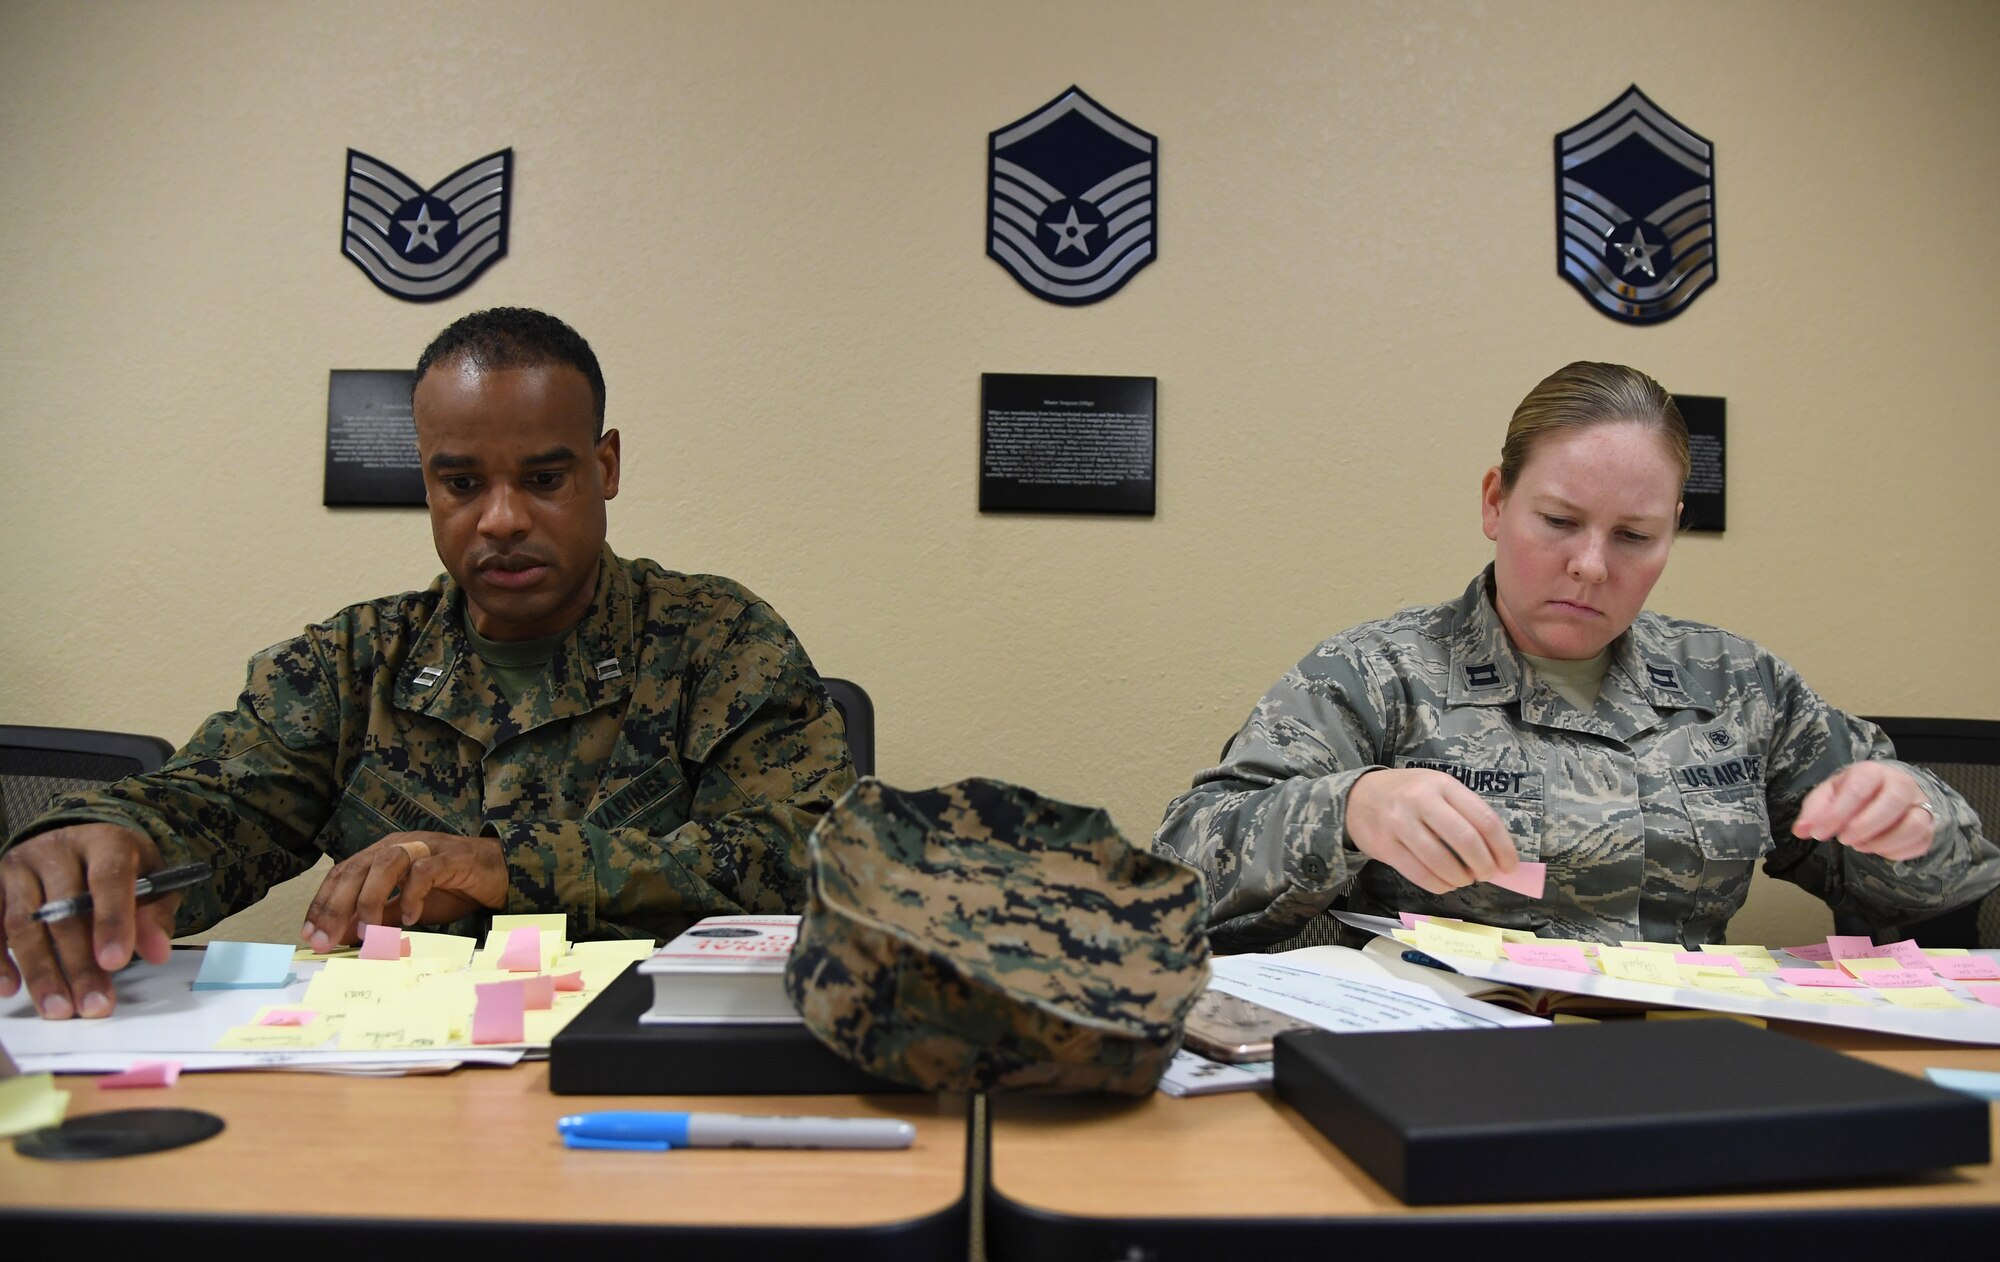 U.S. Marine Capt. Adam Pinkney, Keesler Marine Detachment commanding officer, and U.S. Air Force Capt. Daria Coulthurst, 81st Medical Support Squadron resource management NCO in charge, participate in "A Life-Mapping Experience" exercise during the Leadership Enhancement and Development Seminar inside the Airman Leadership School building at Keesler Air Force Base, Mississippi, Nov. 5, 2019. The three-day course, which is open to all supervisors, is meant to enhance effective communication, skillful interpersonal interaction and emotional intelligence in the military environment by using an active learning format that emphasizes discussion and minimizes lecture. (U.S. Air Force photo by Kemberly Groue)